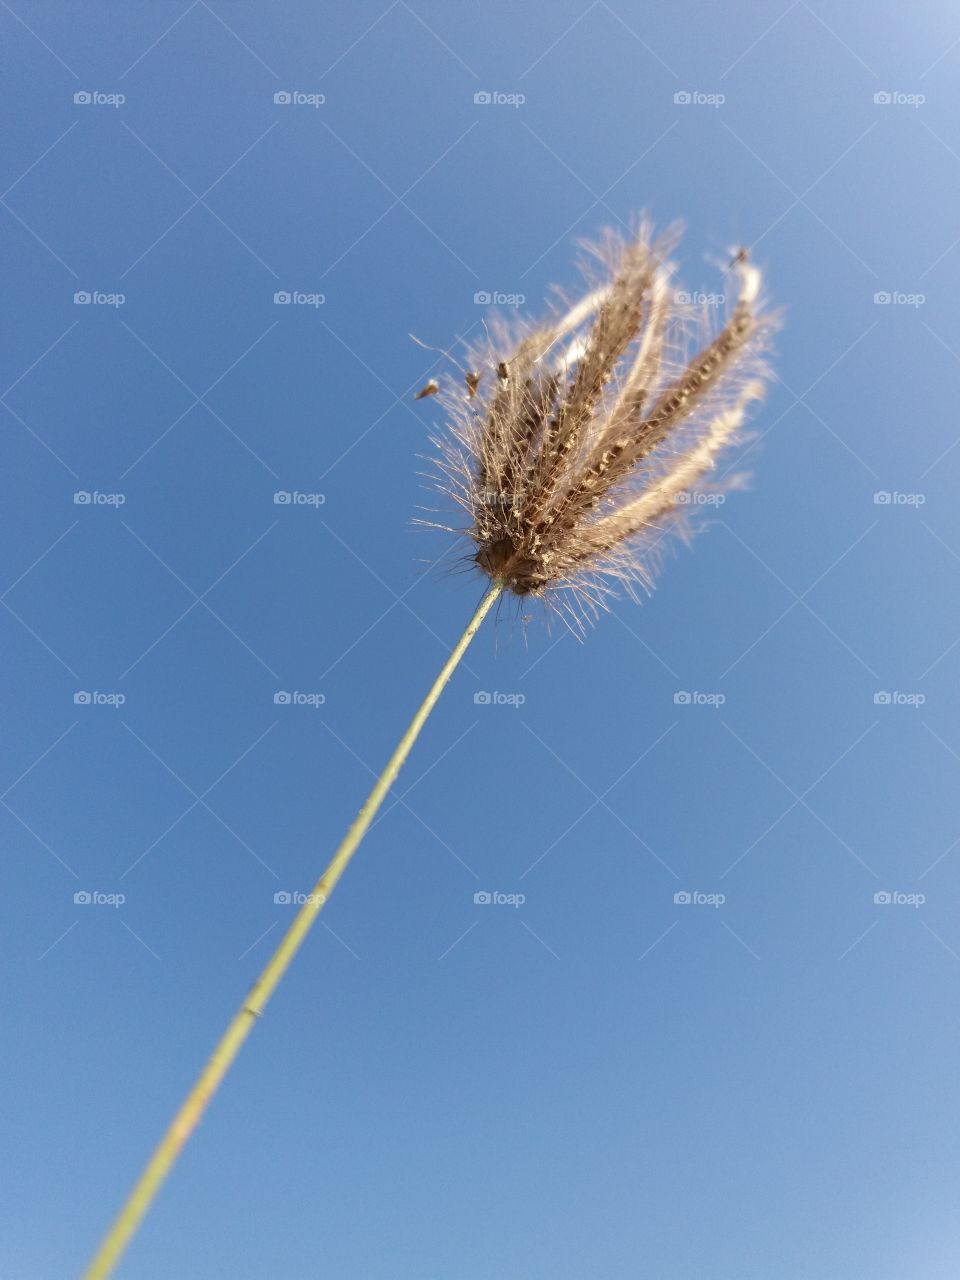 Grass flower with blue sky background